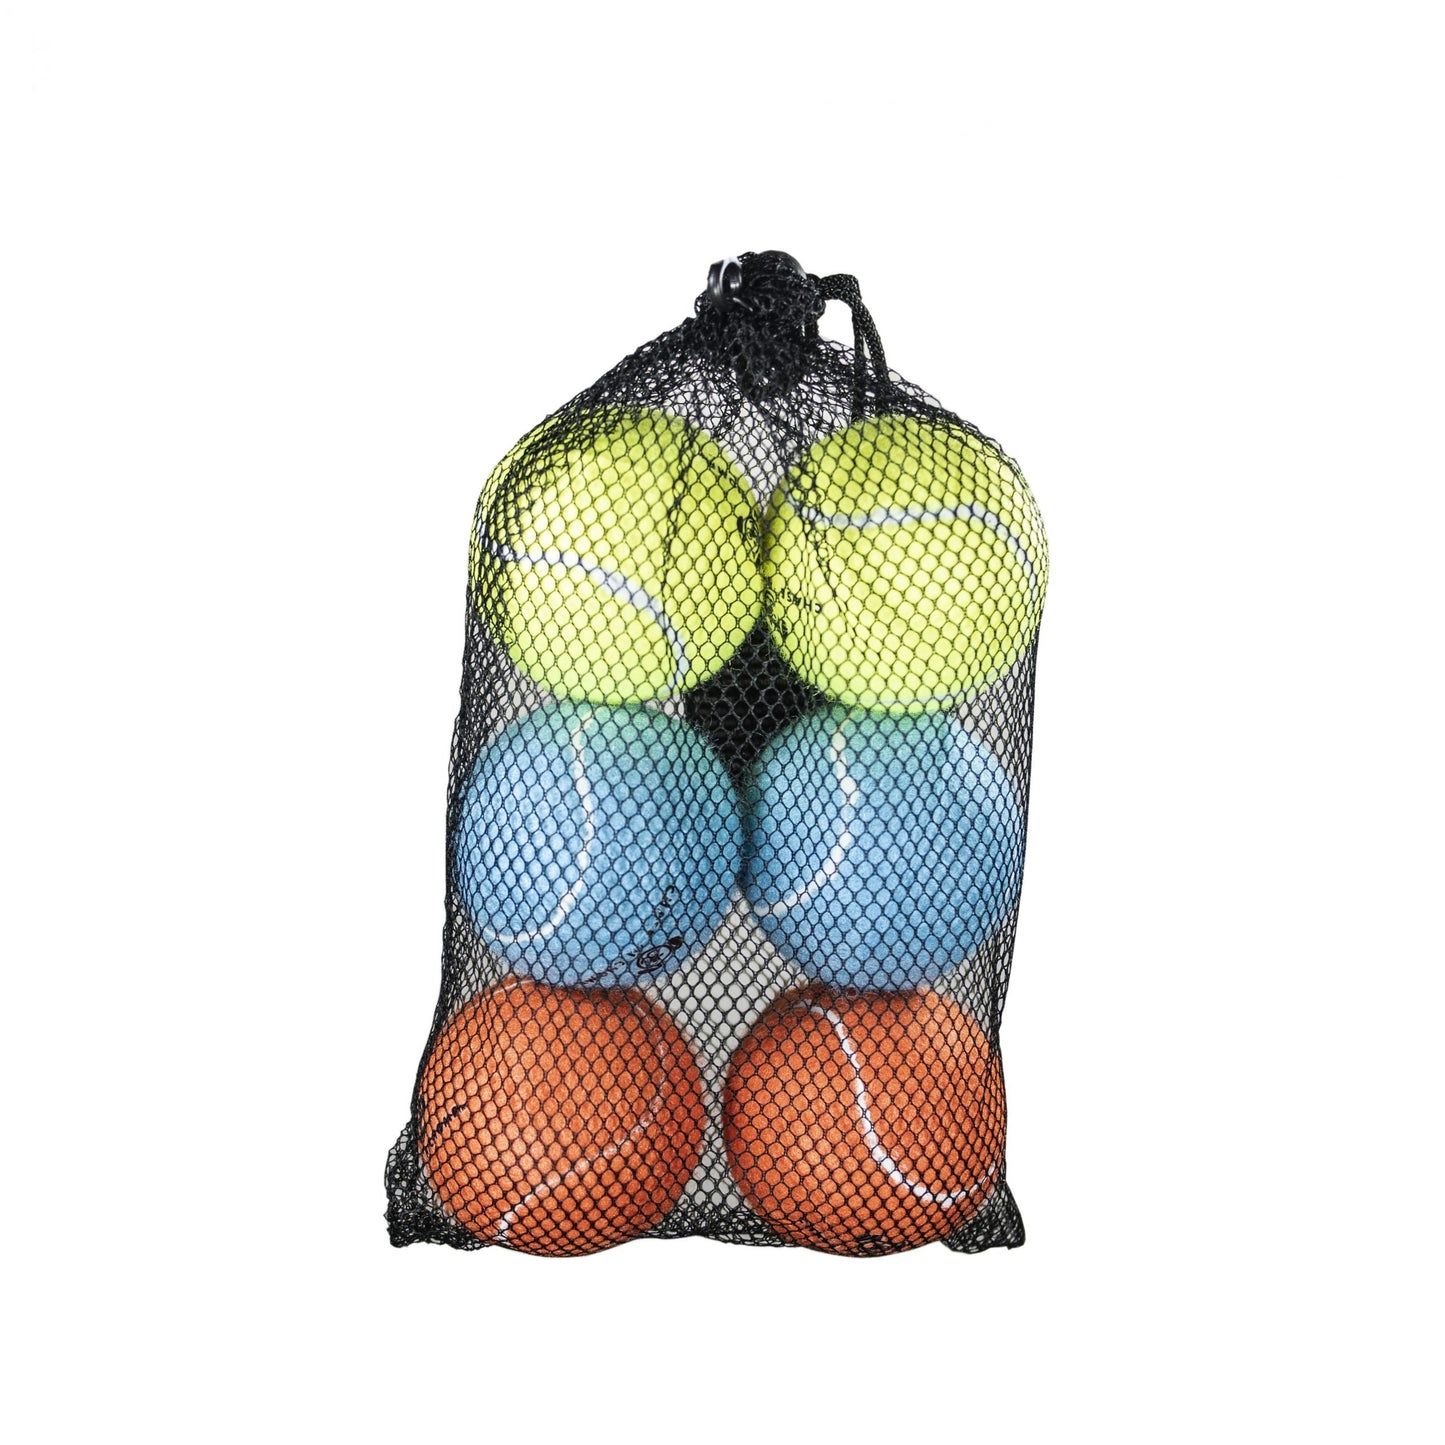 Tennis ball pack for dogs